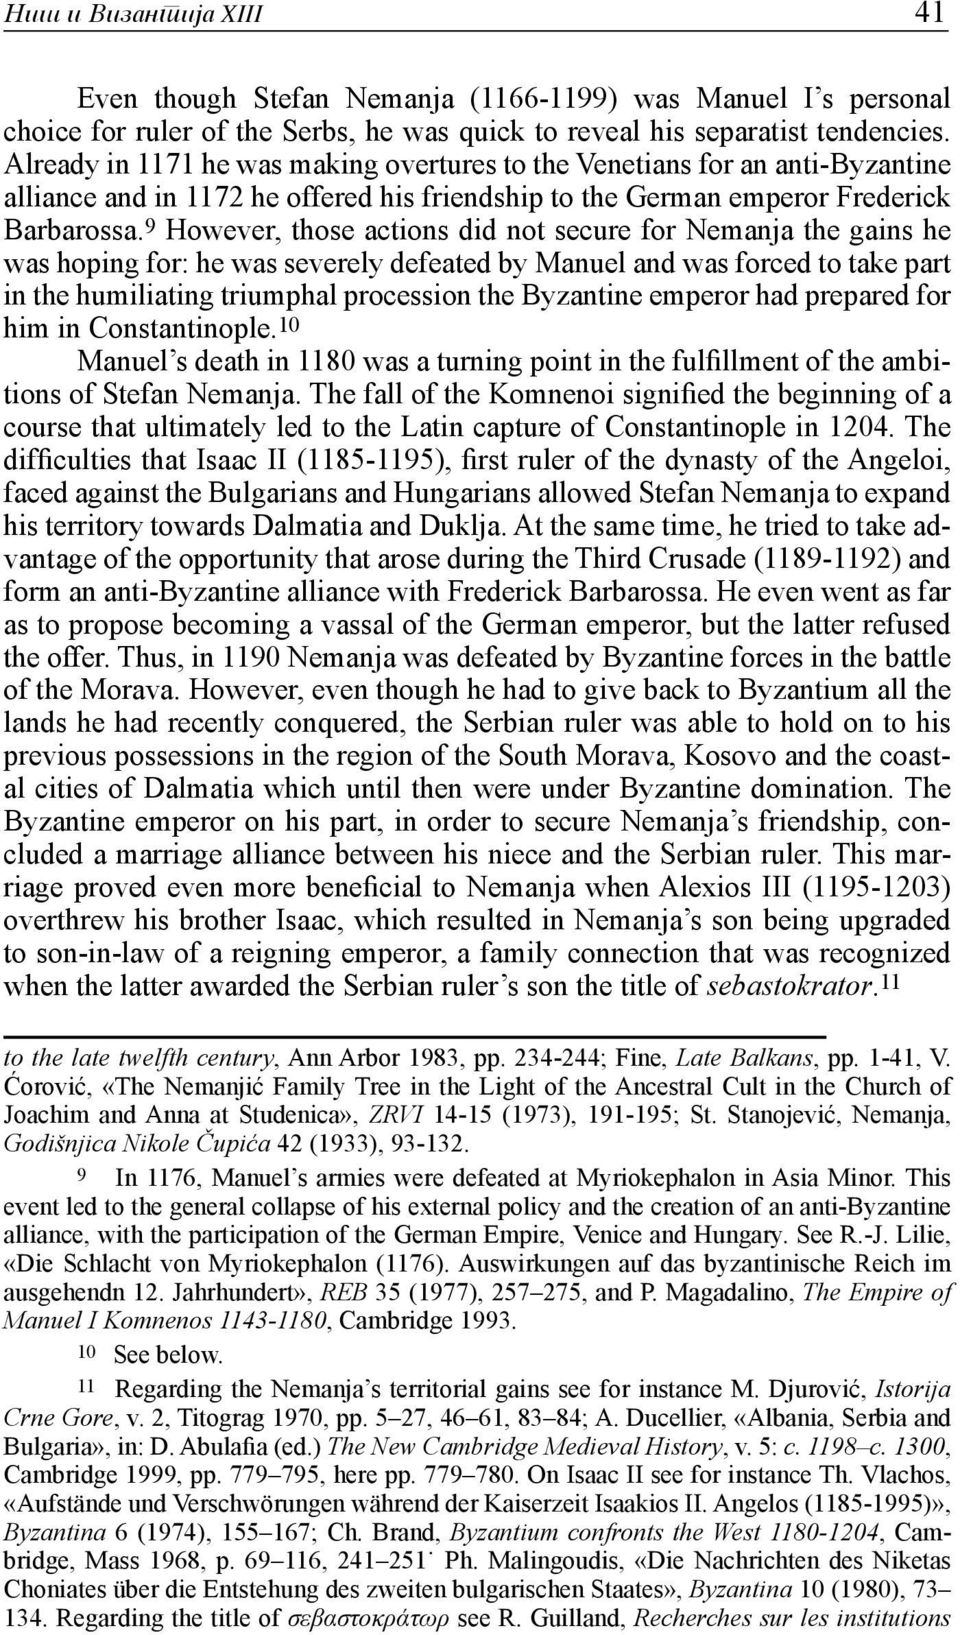 9 However, those actions did not secure for Nemanja the gains he was hoping for: he was severely defeated by Manuel and was forced to take part in the humiliating triumphal procession the Byzantine